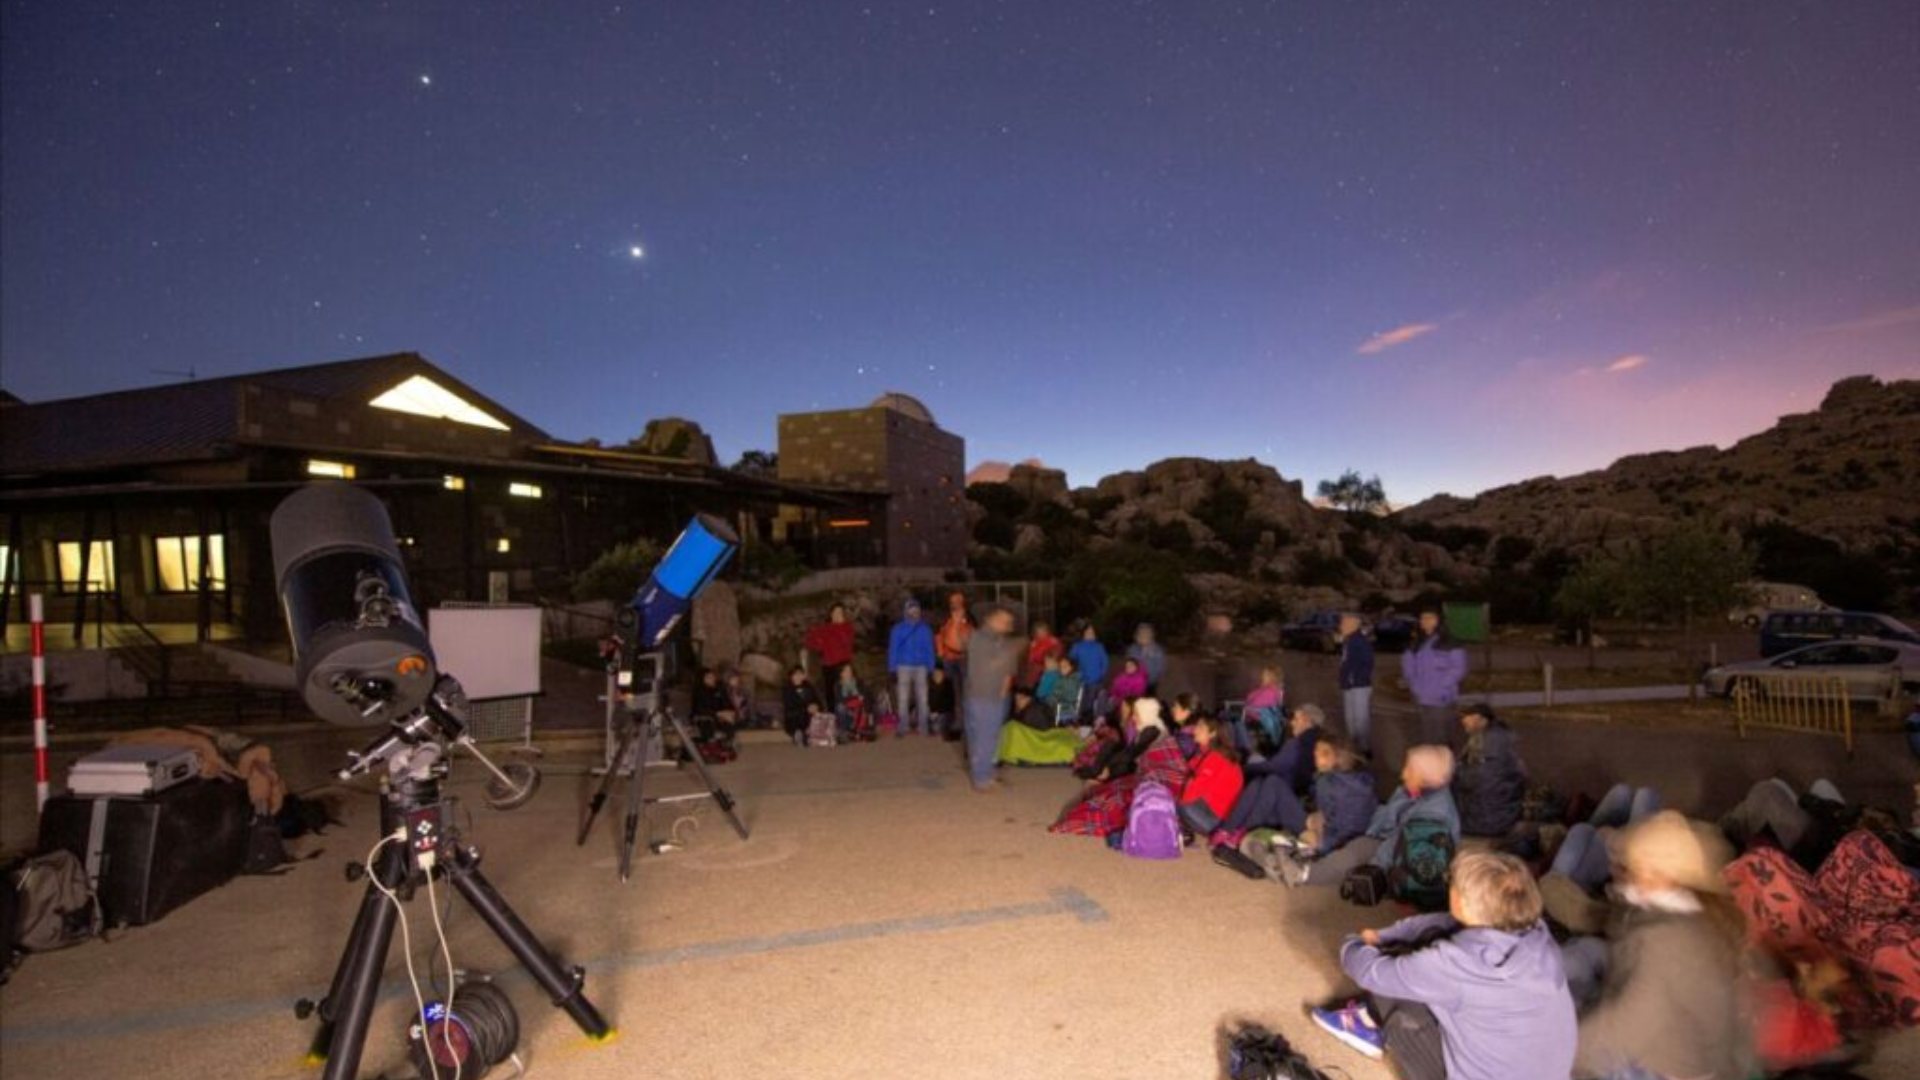 Children at the astronomical observatory of Antequera